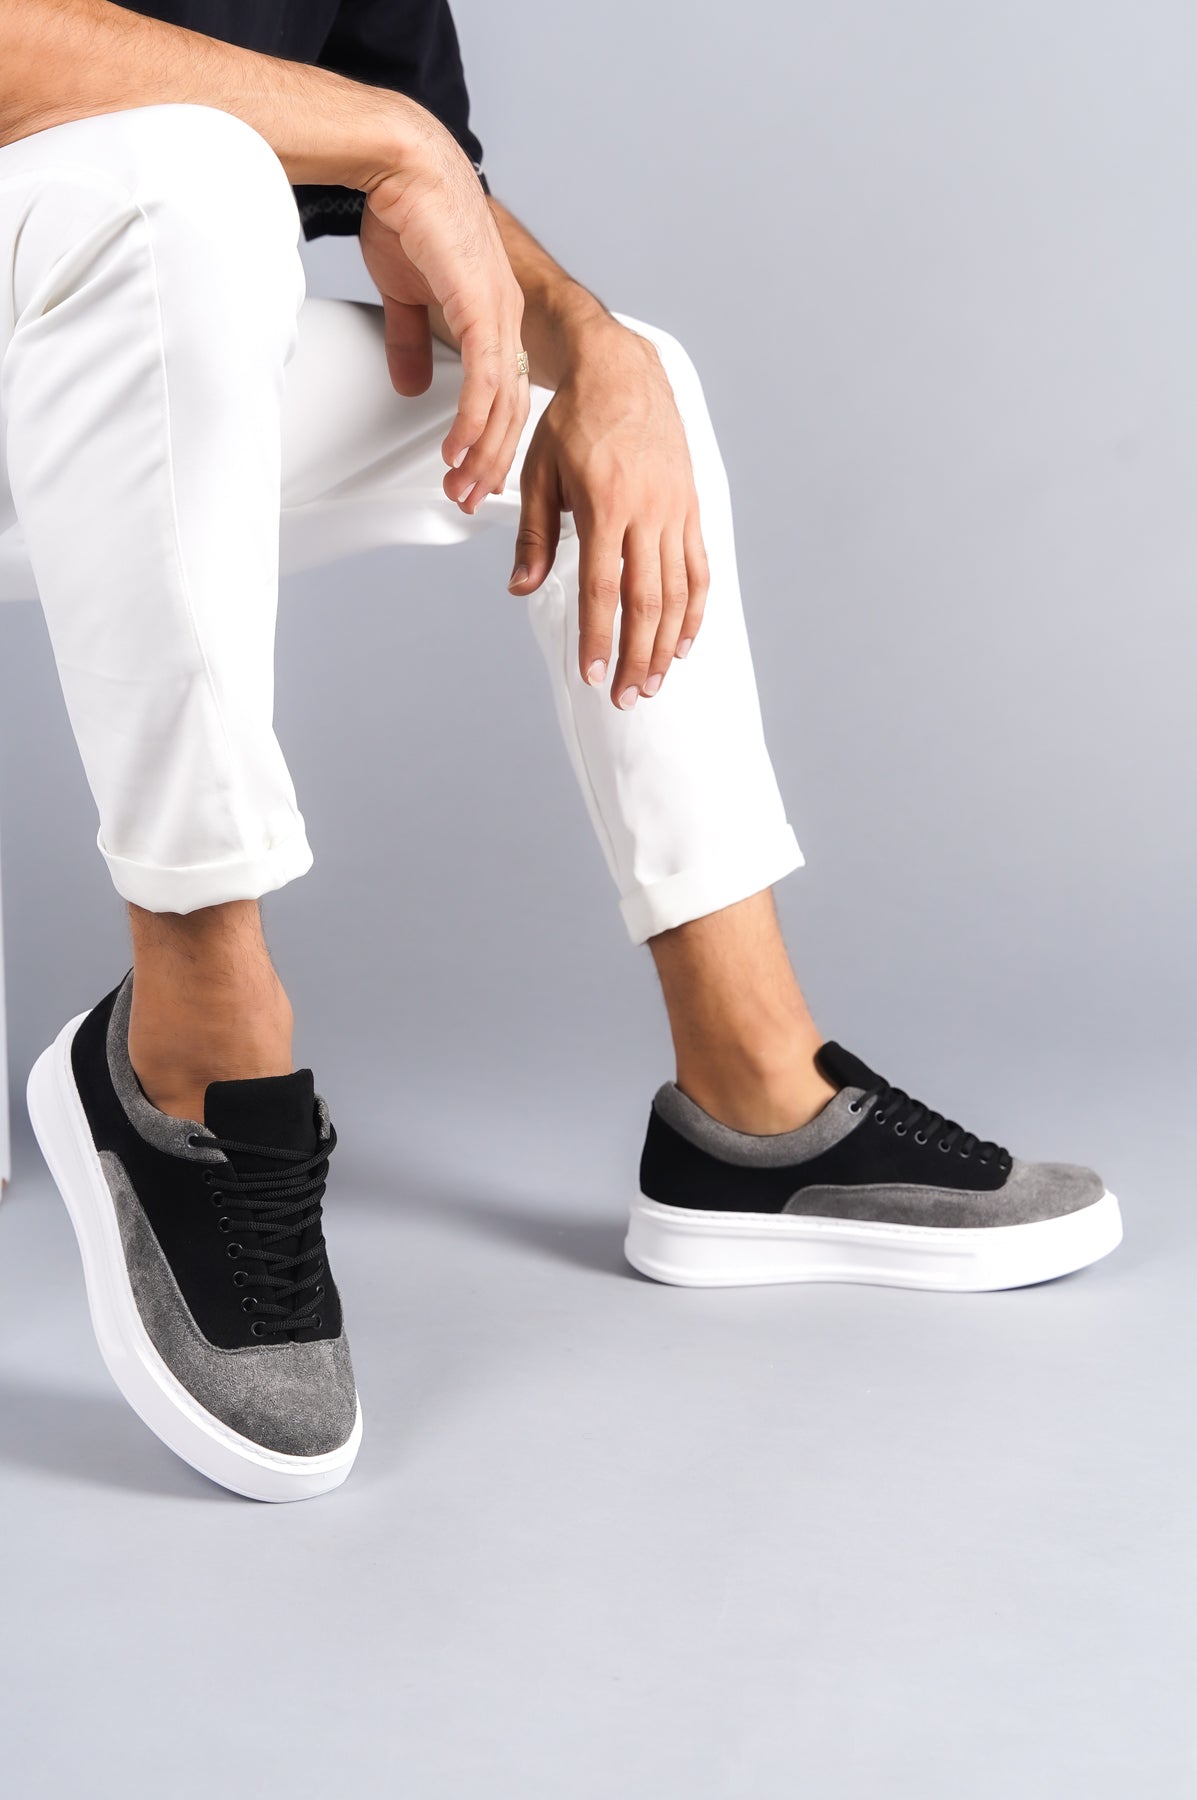 KB-005 Black Gray Suede Laced Casual Men's Sneakers Shoes - STREETMODE™